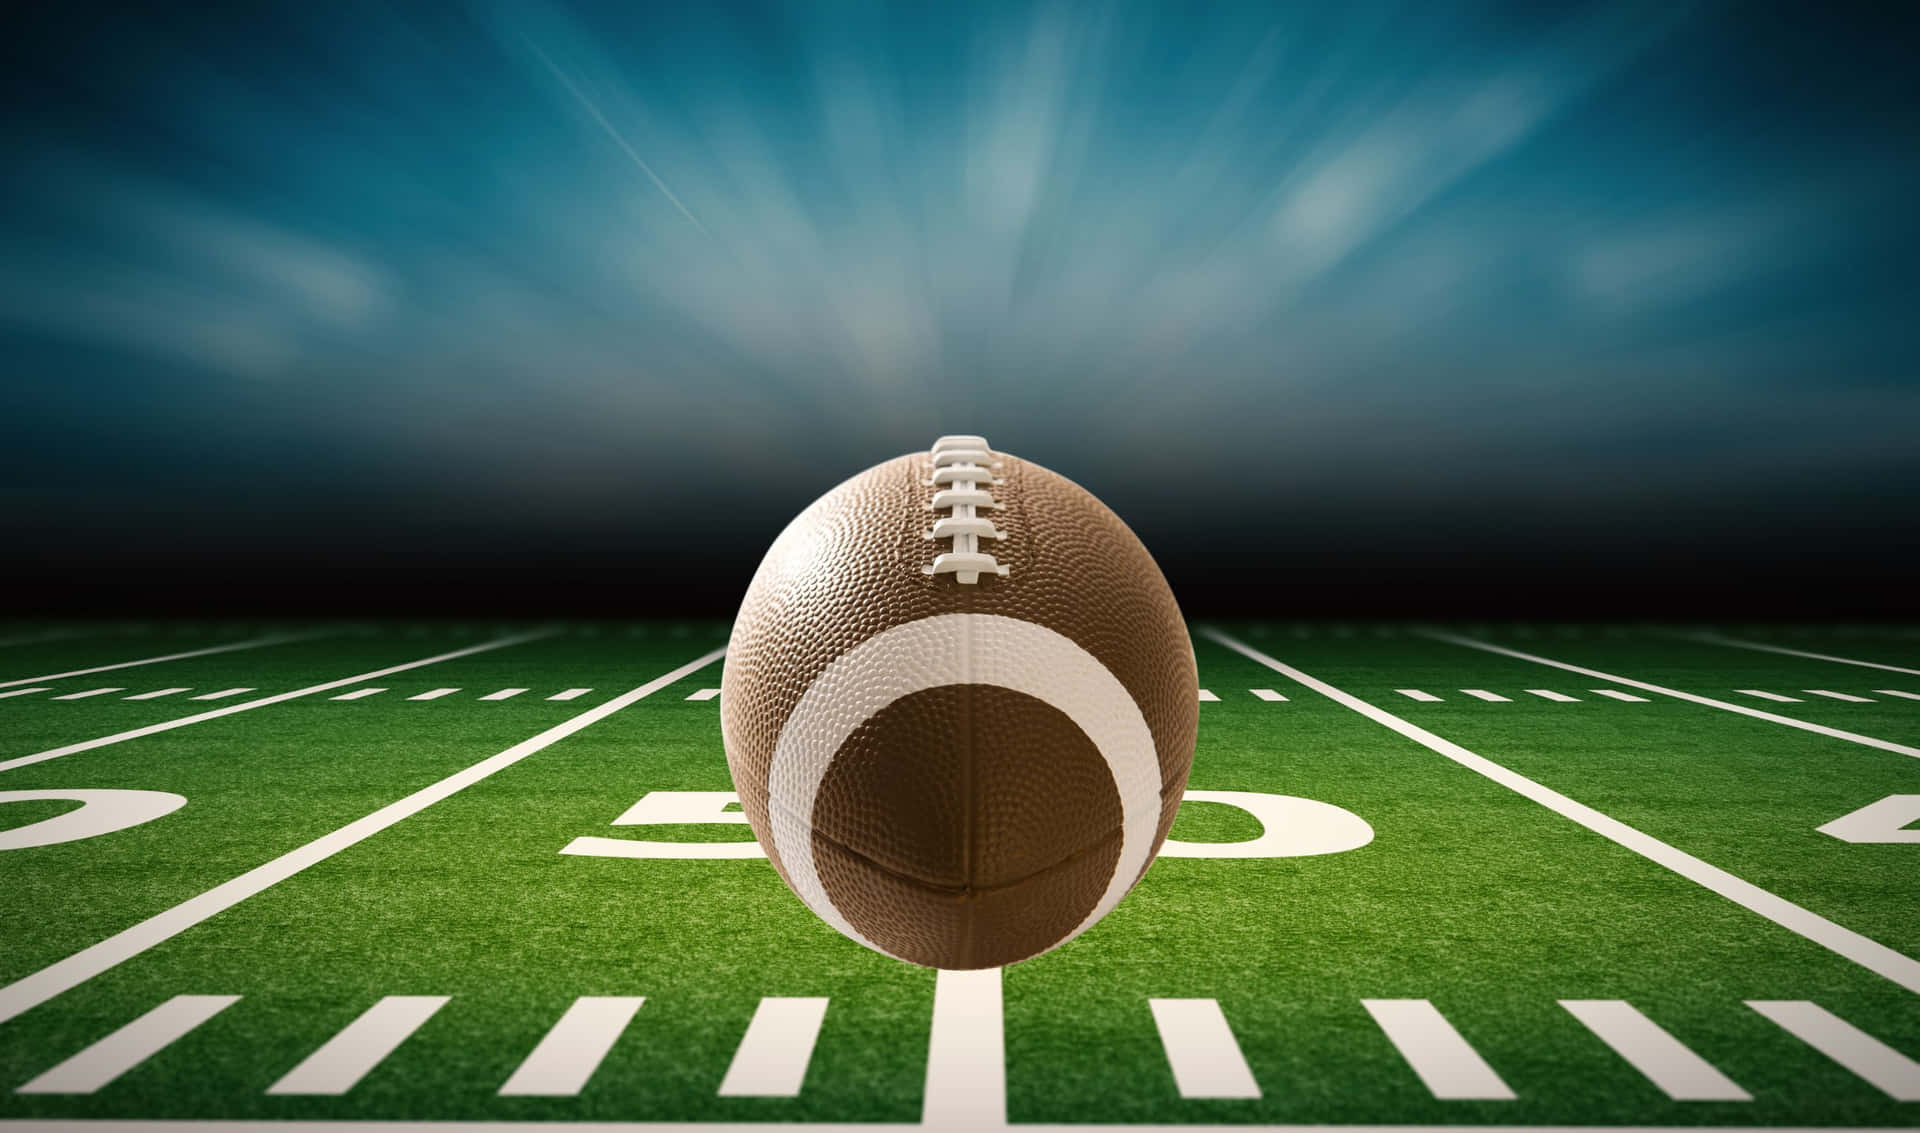 2440x1440 Football Background Rugby Fall Creative Graphic Background